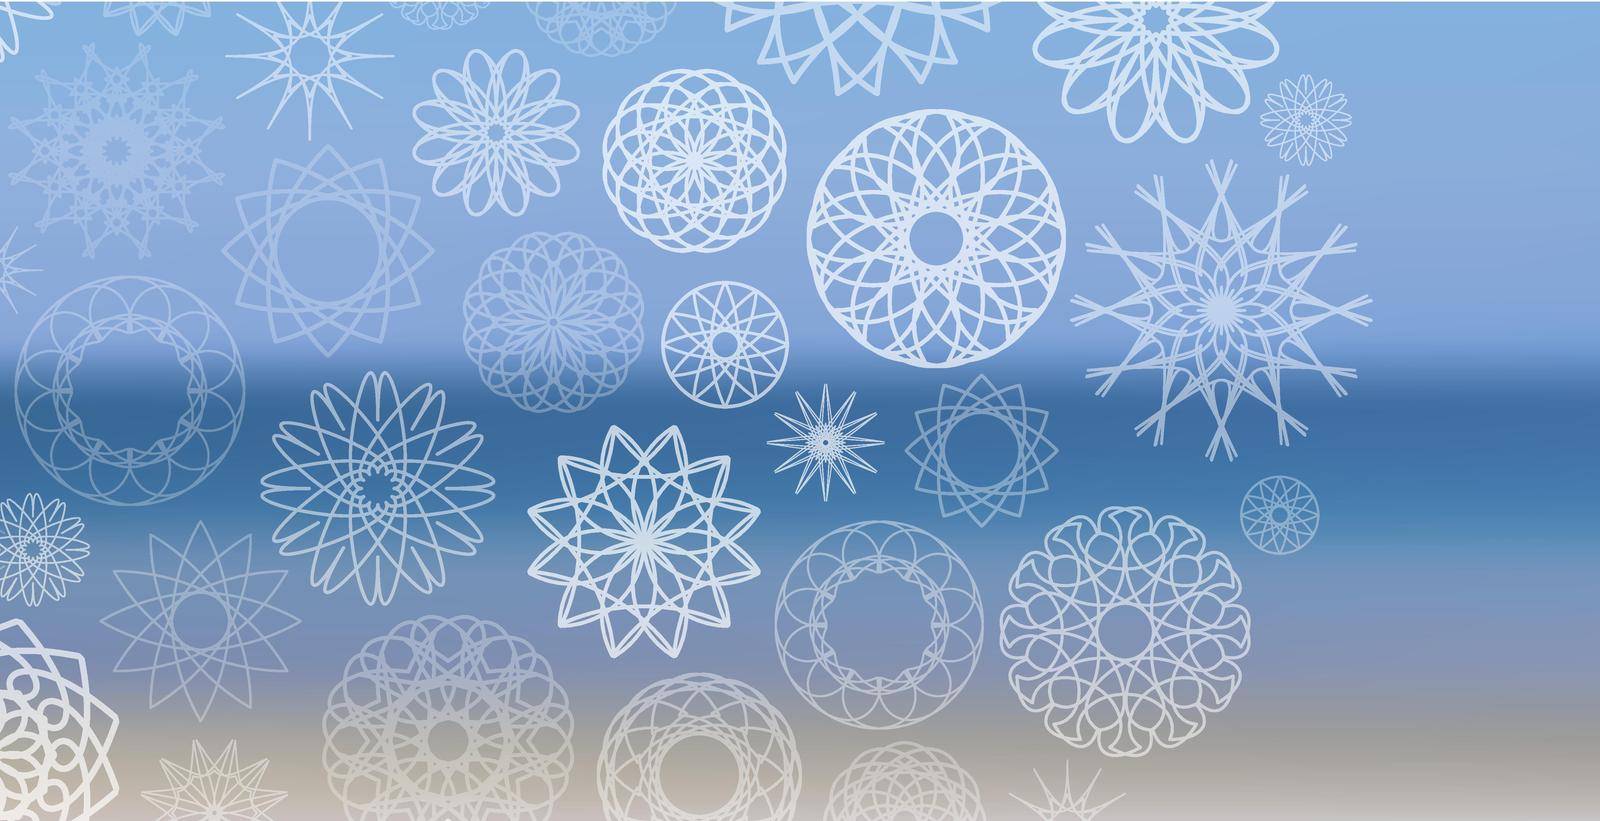 Summer beach background with snowflakes ornament. Vector illustration